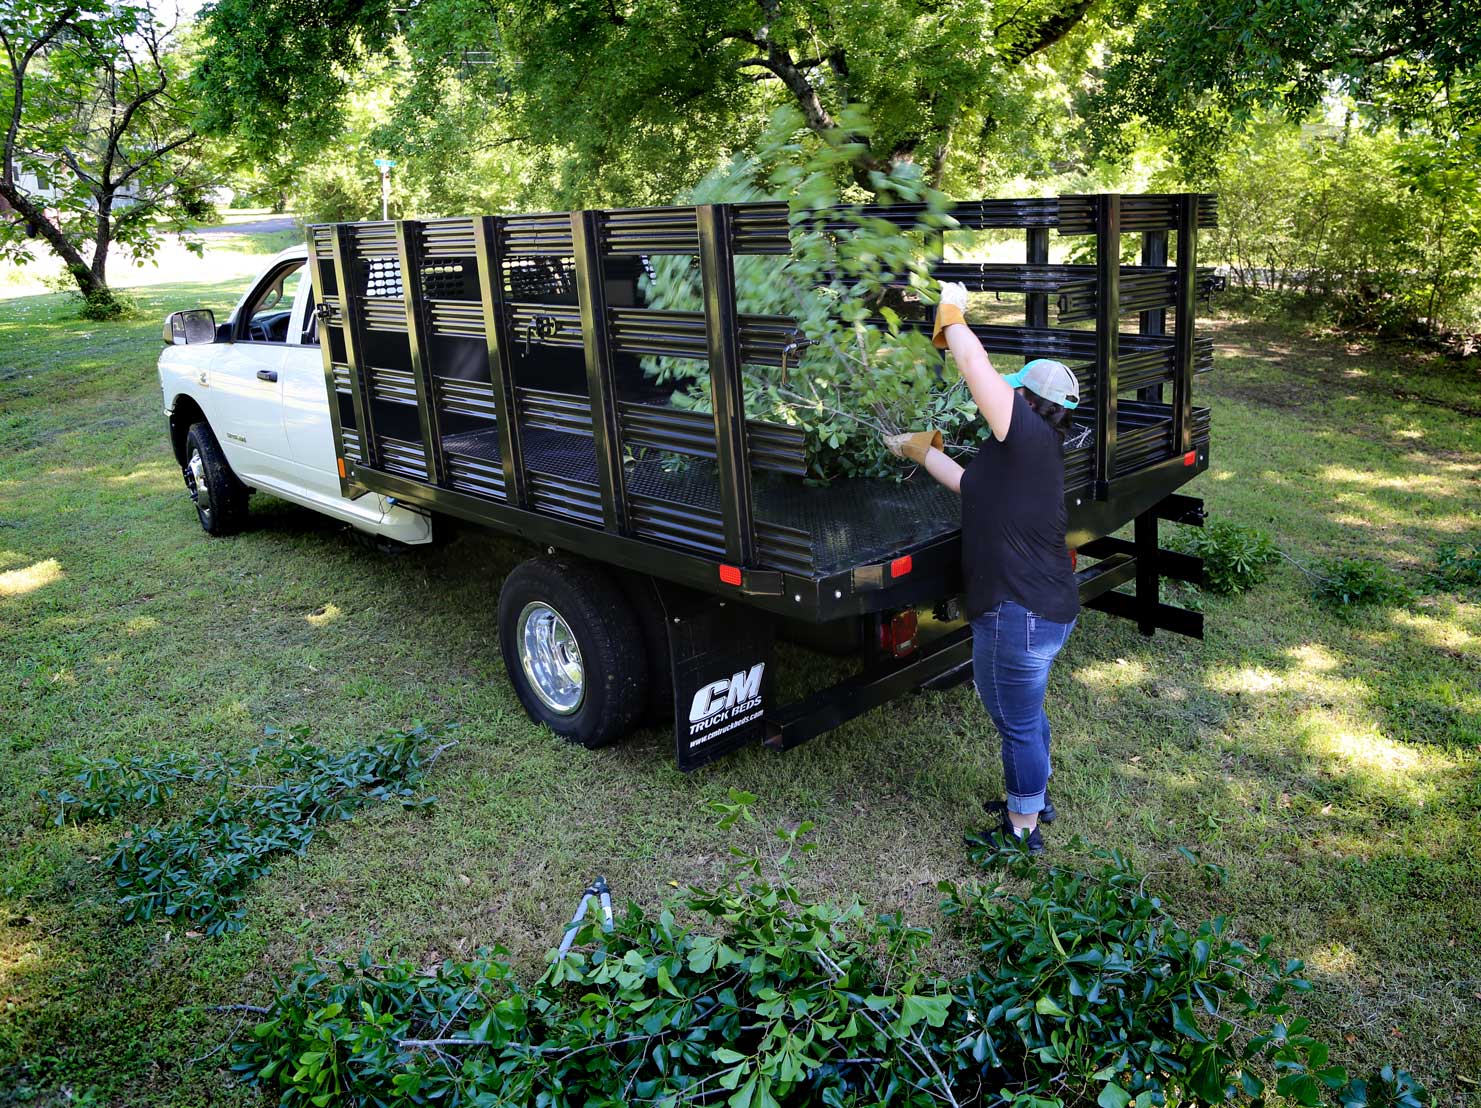 Landscaper using PL trailer bed with stake side option to clean up leaves from lawn